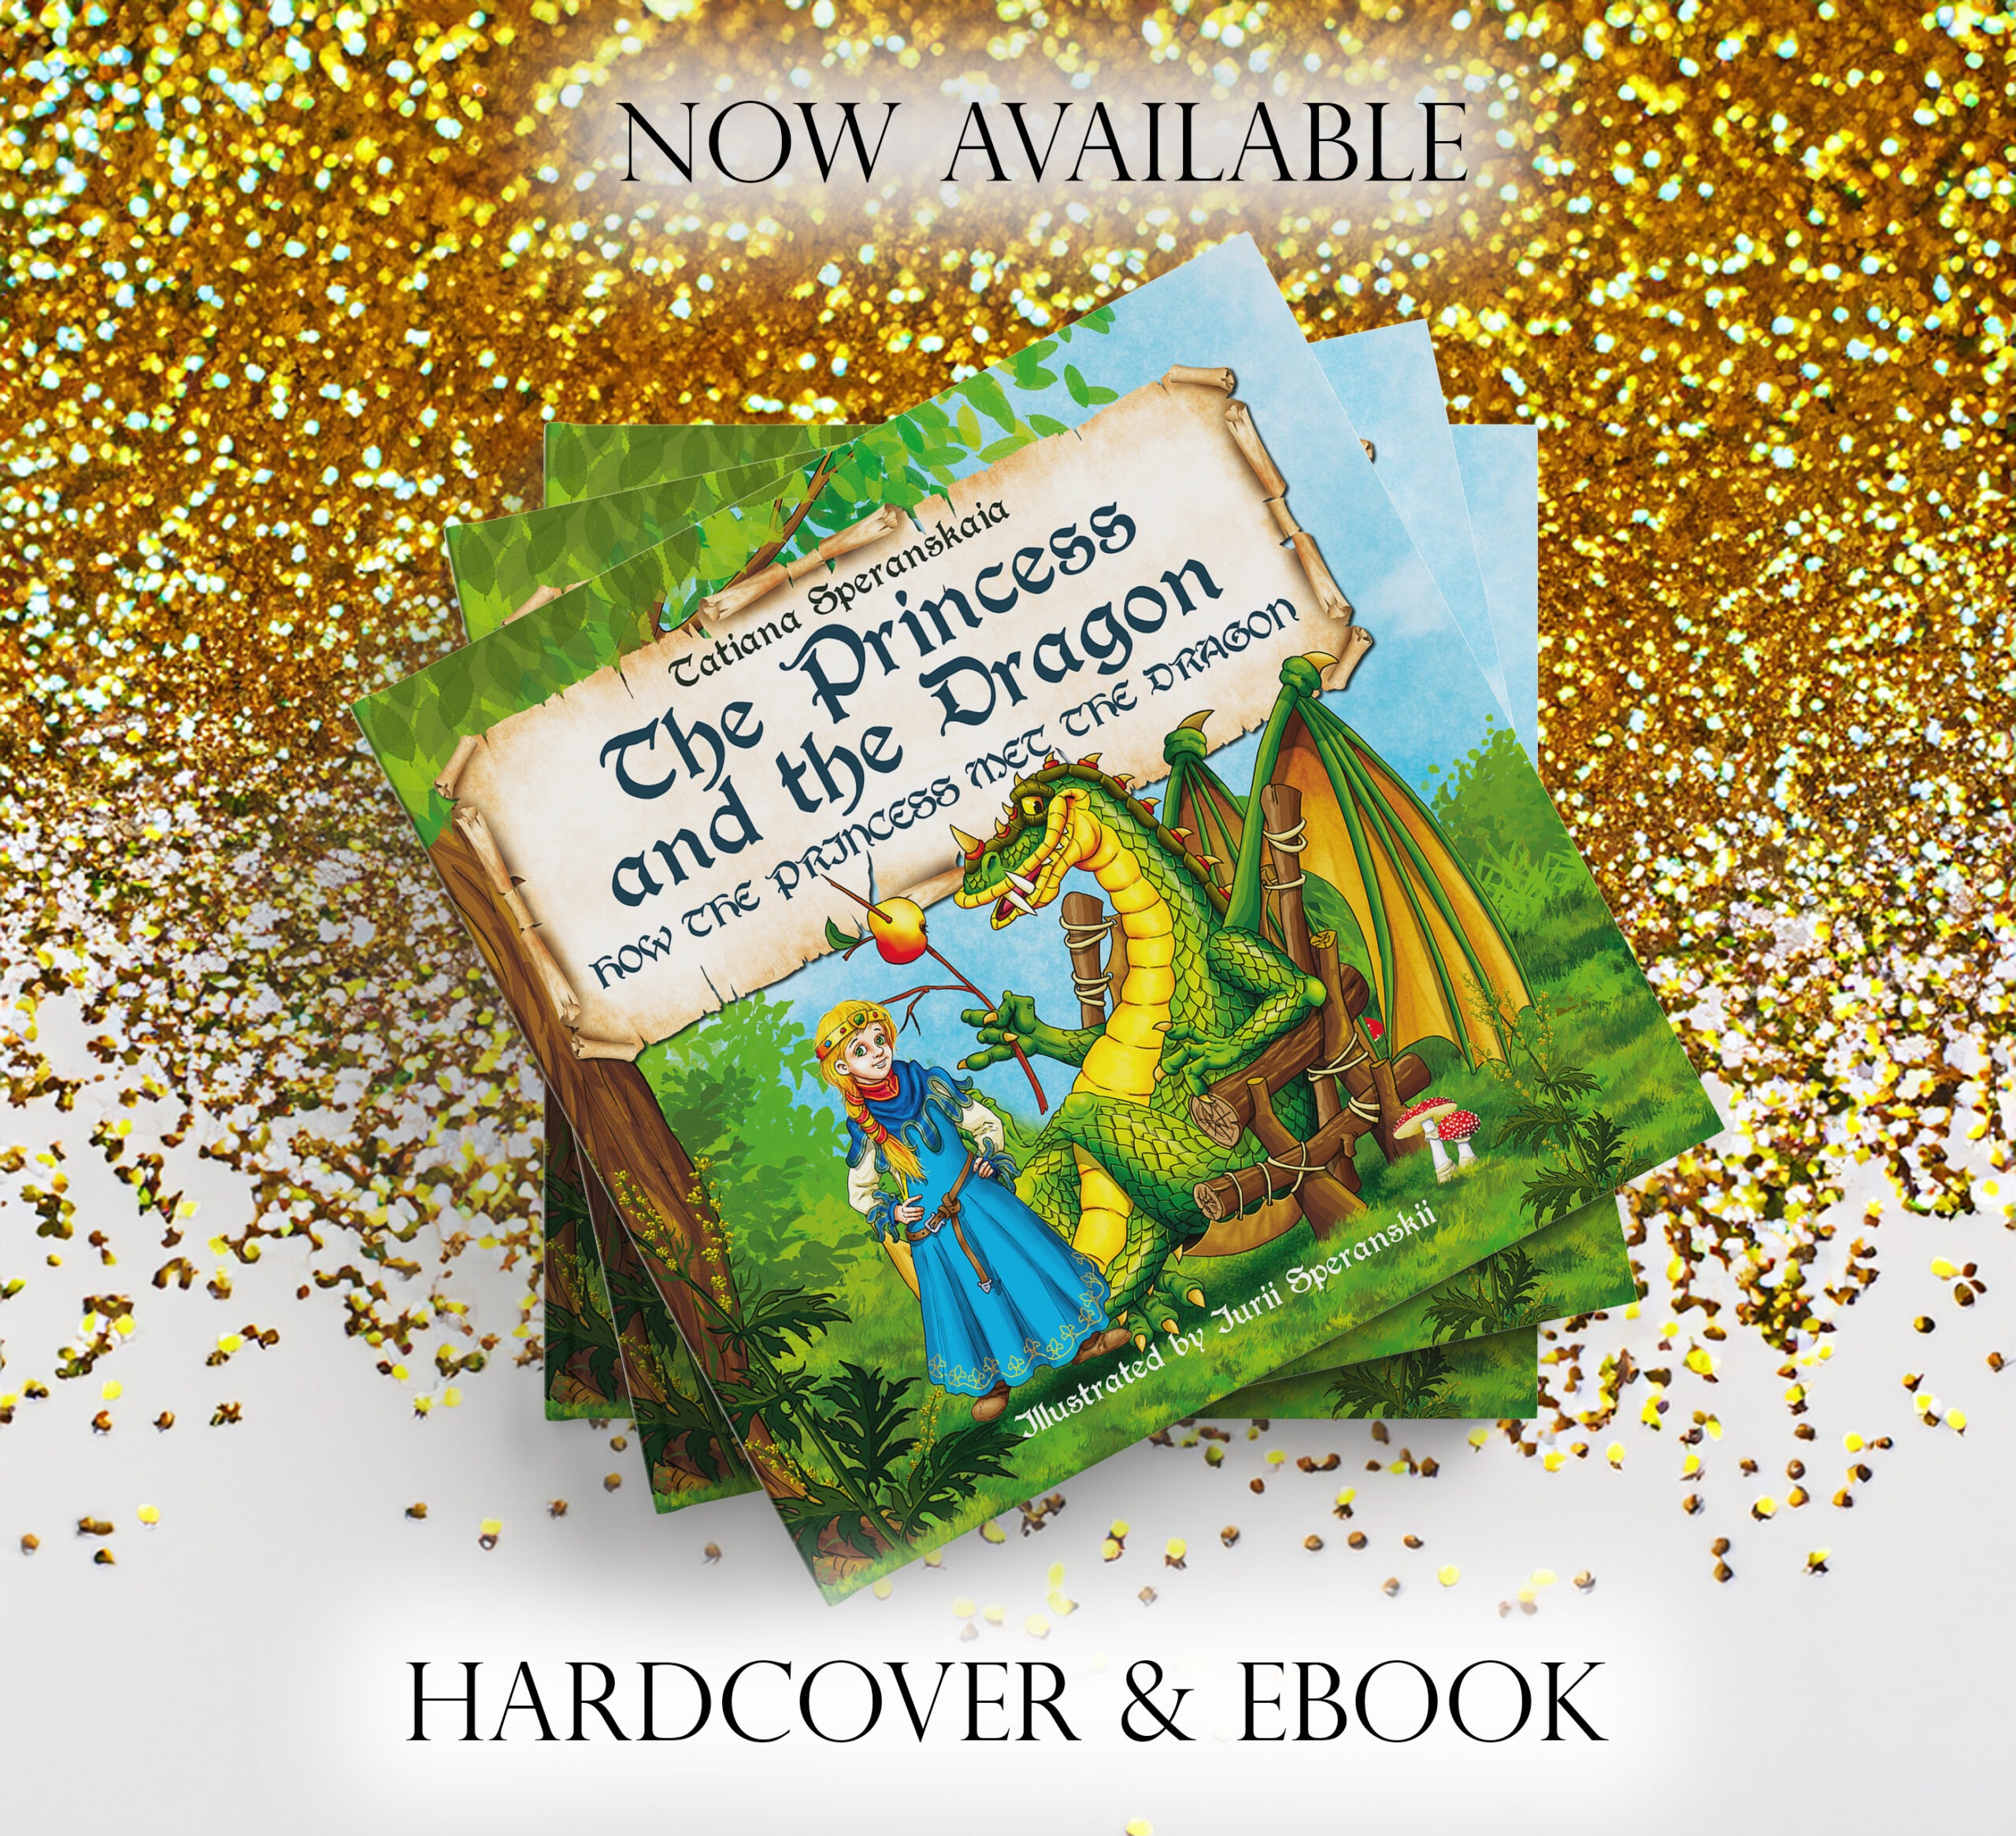 The Princess and the Dragon: Volume I, by Tatiana Speranskaia available now from Histria Books